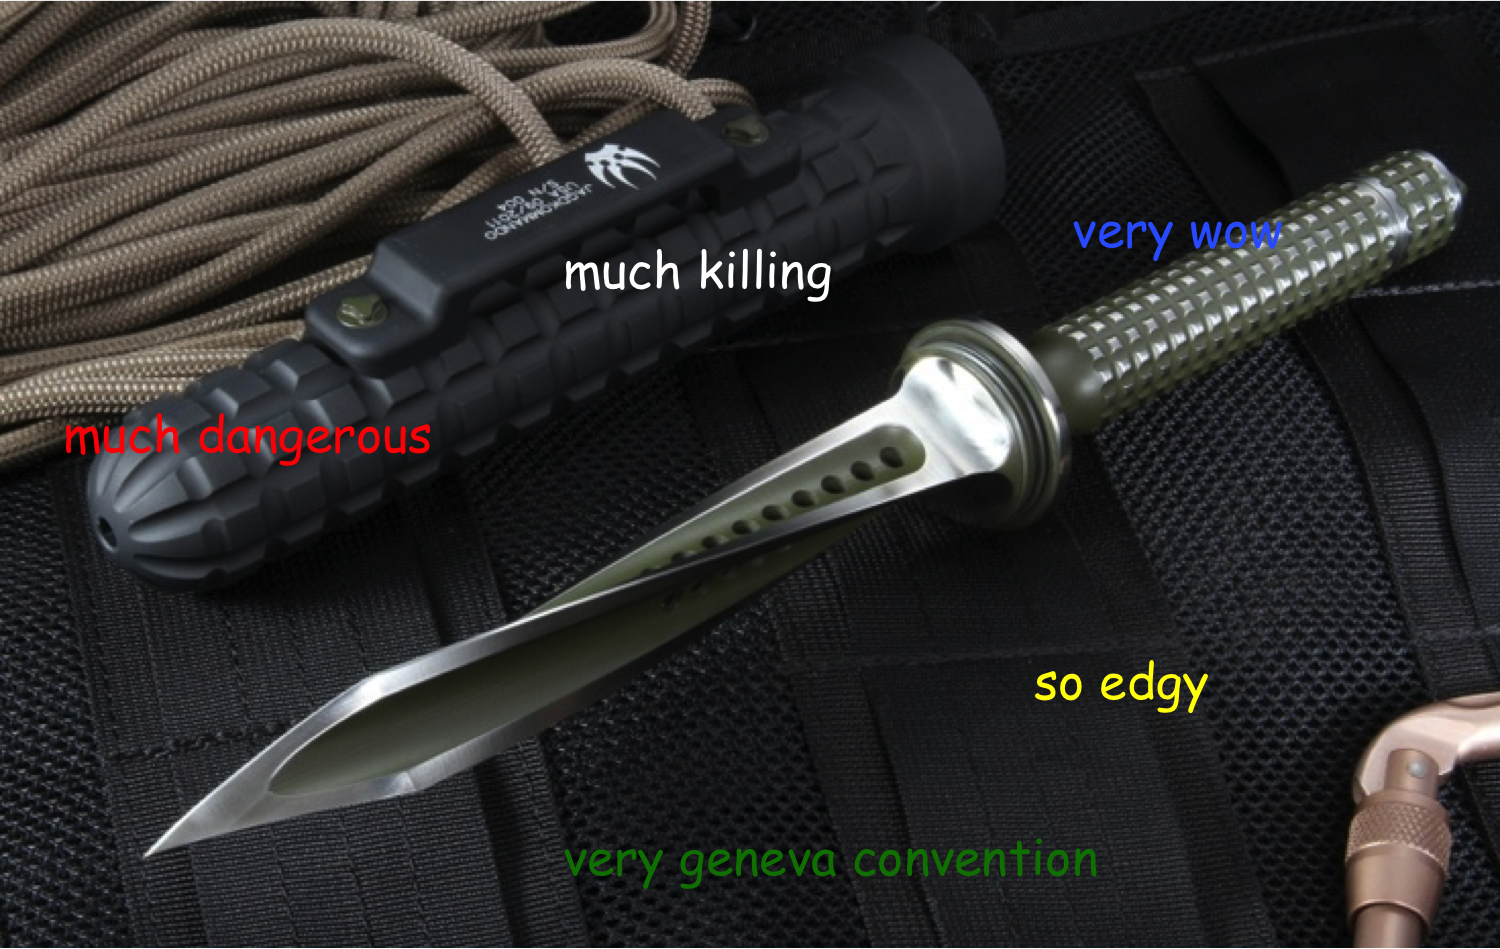 If I see one more post about this knife I will use to kill myself